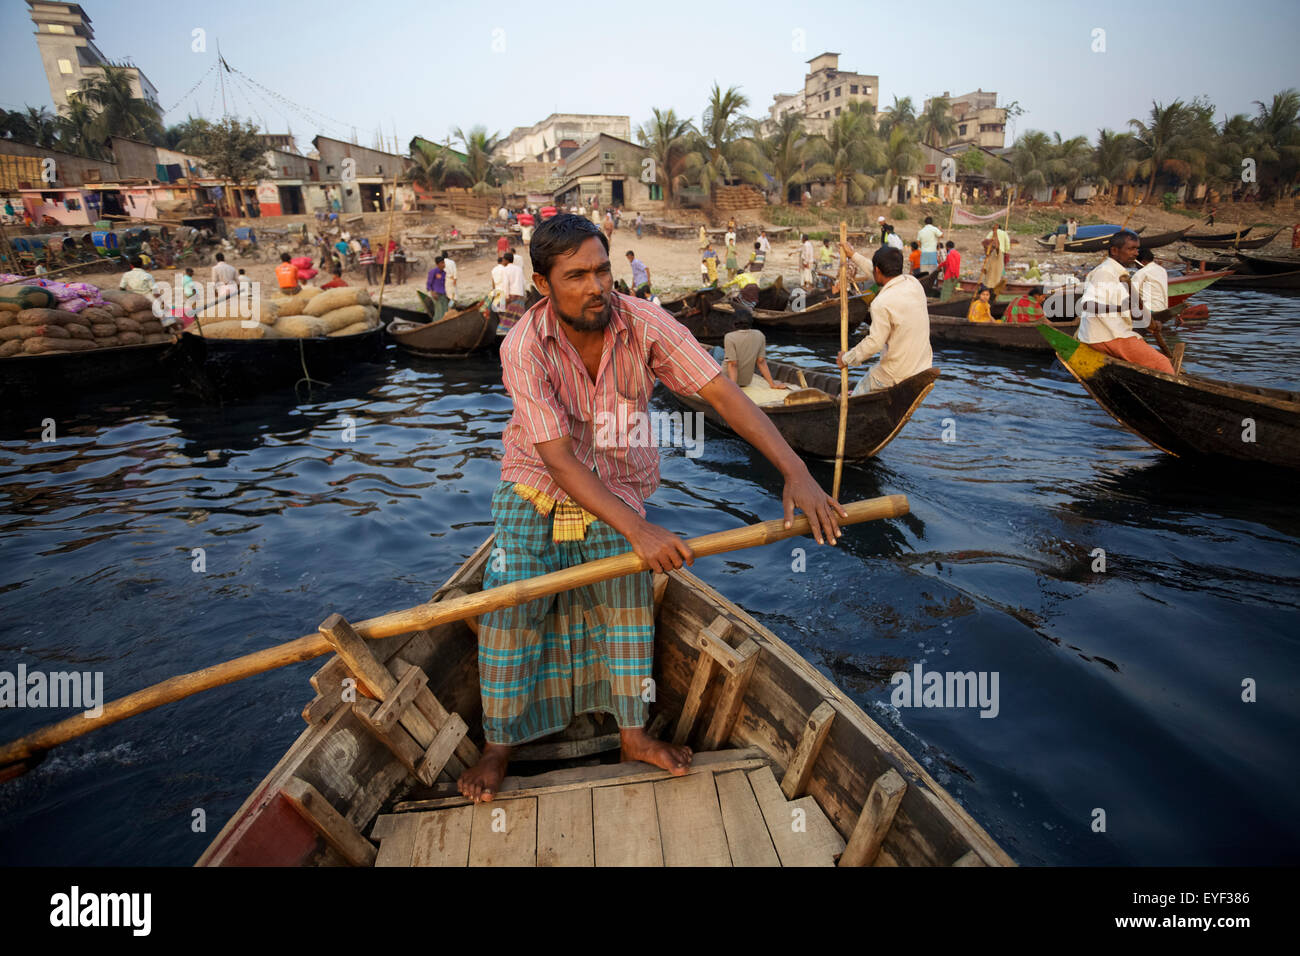 A man stands in a wooden boat rowing with large wooden paddle; Sadarghat, Dhaka, Bangladesh Stock Photo